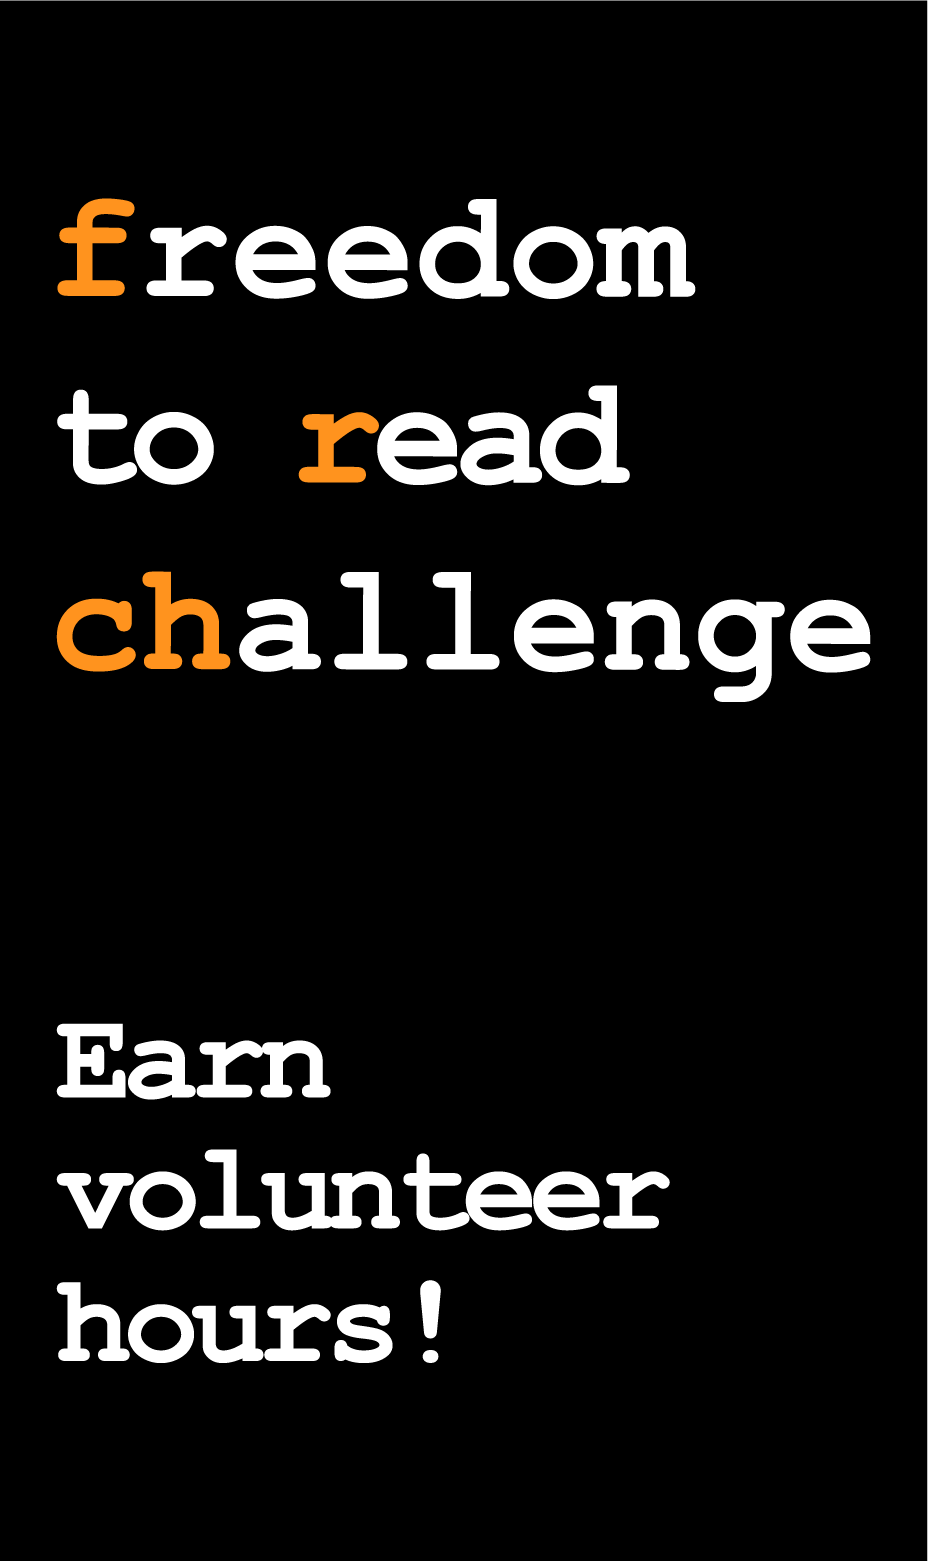 Black background and text, "freedom to read challenge, earn volunteer hours!."